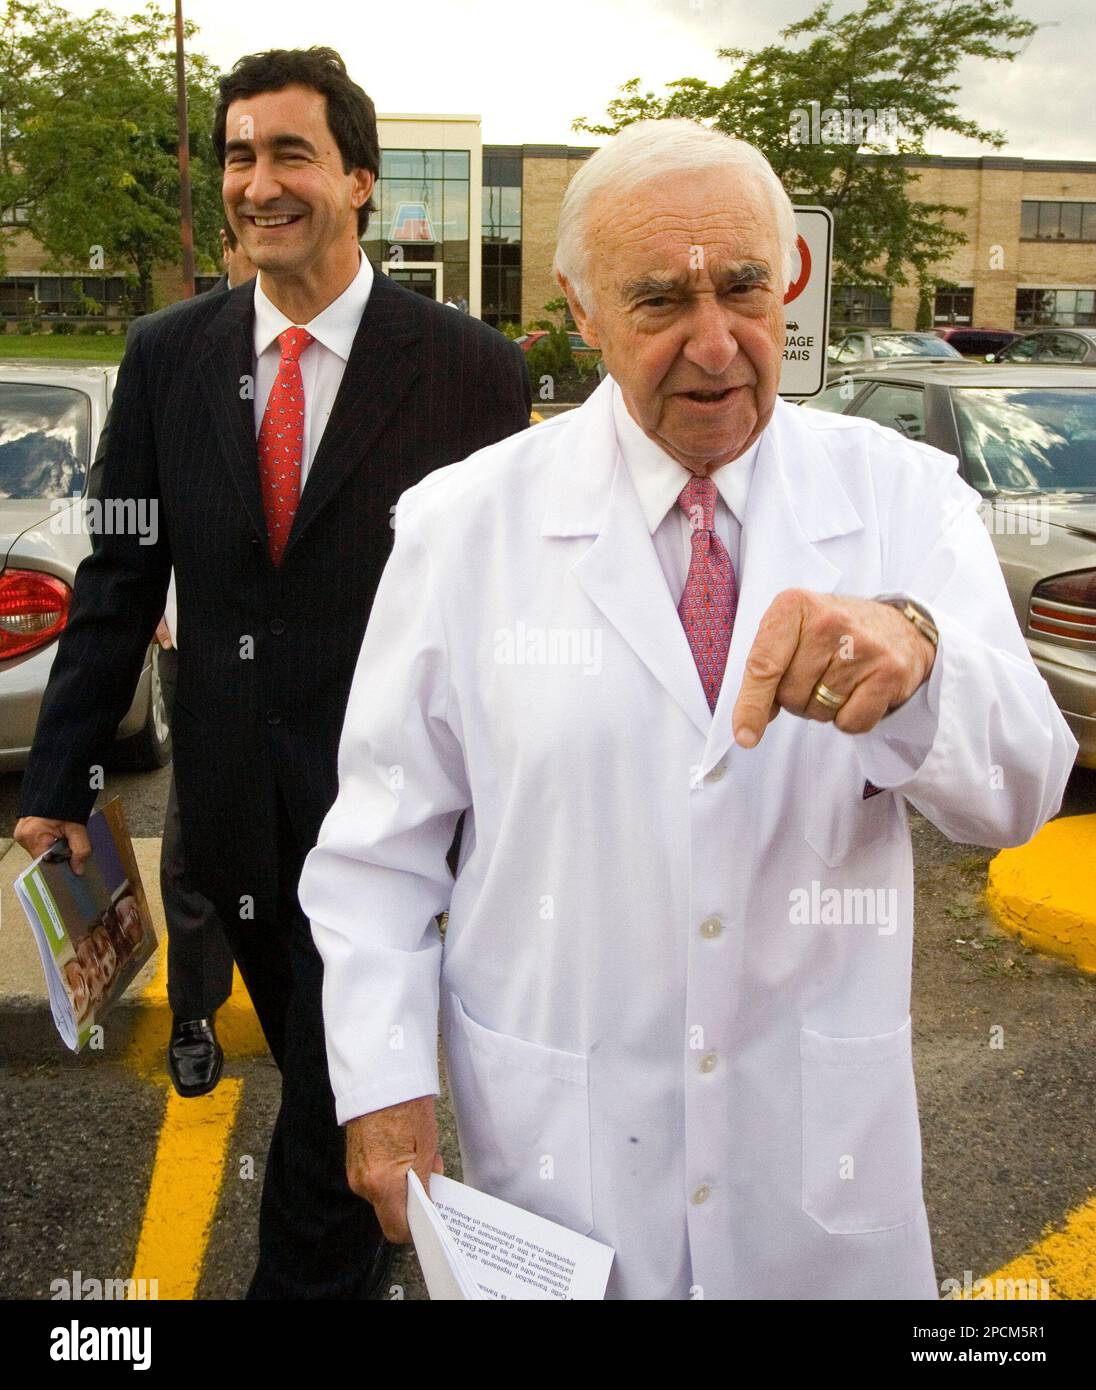 Jean Coutu, chairman and CEO of Jean Coutu Group, walks to a news  conference accompanied by his son Francois, president of Canadian  operations Thursday, Aug. 24, 2006 in Longueuil, Quebec,Canada. The pharmacy